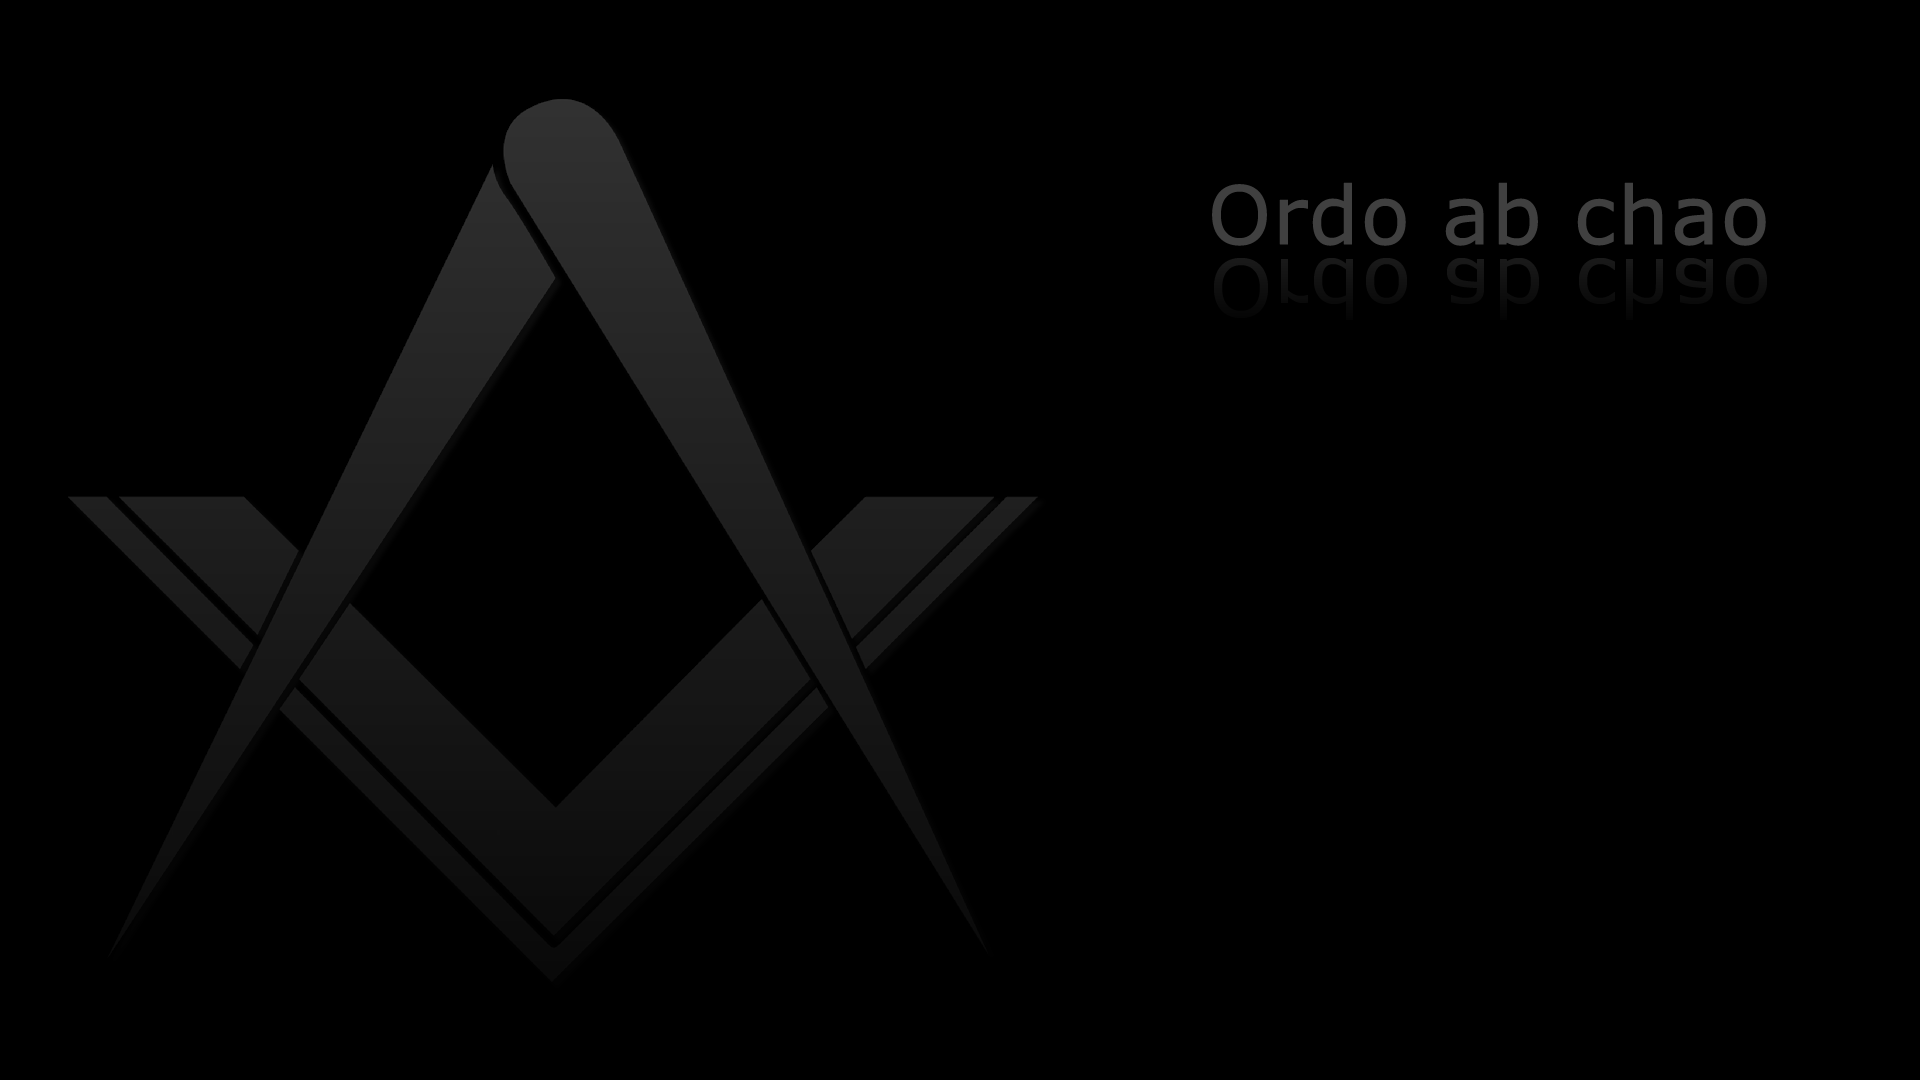 20 Freemason Wallpaper At FindFreeGraphics Use Our 1920x1080